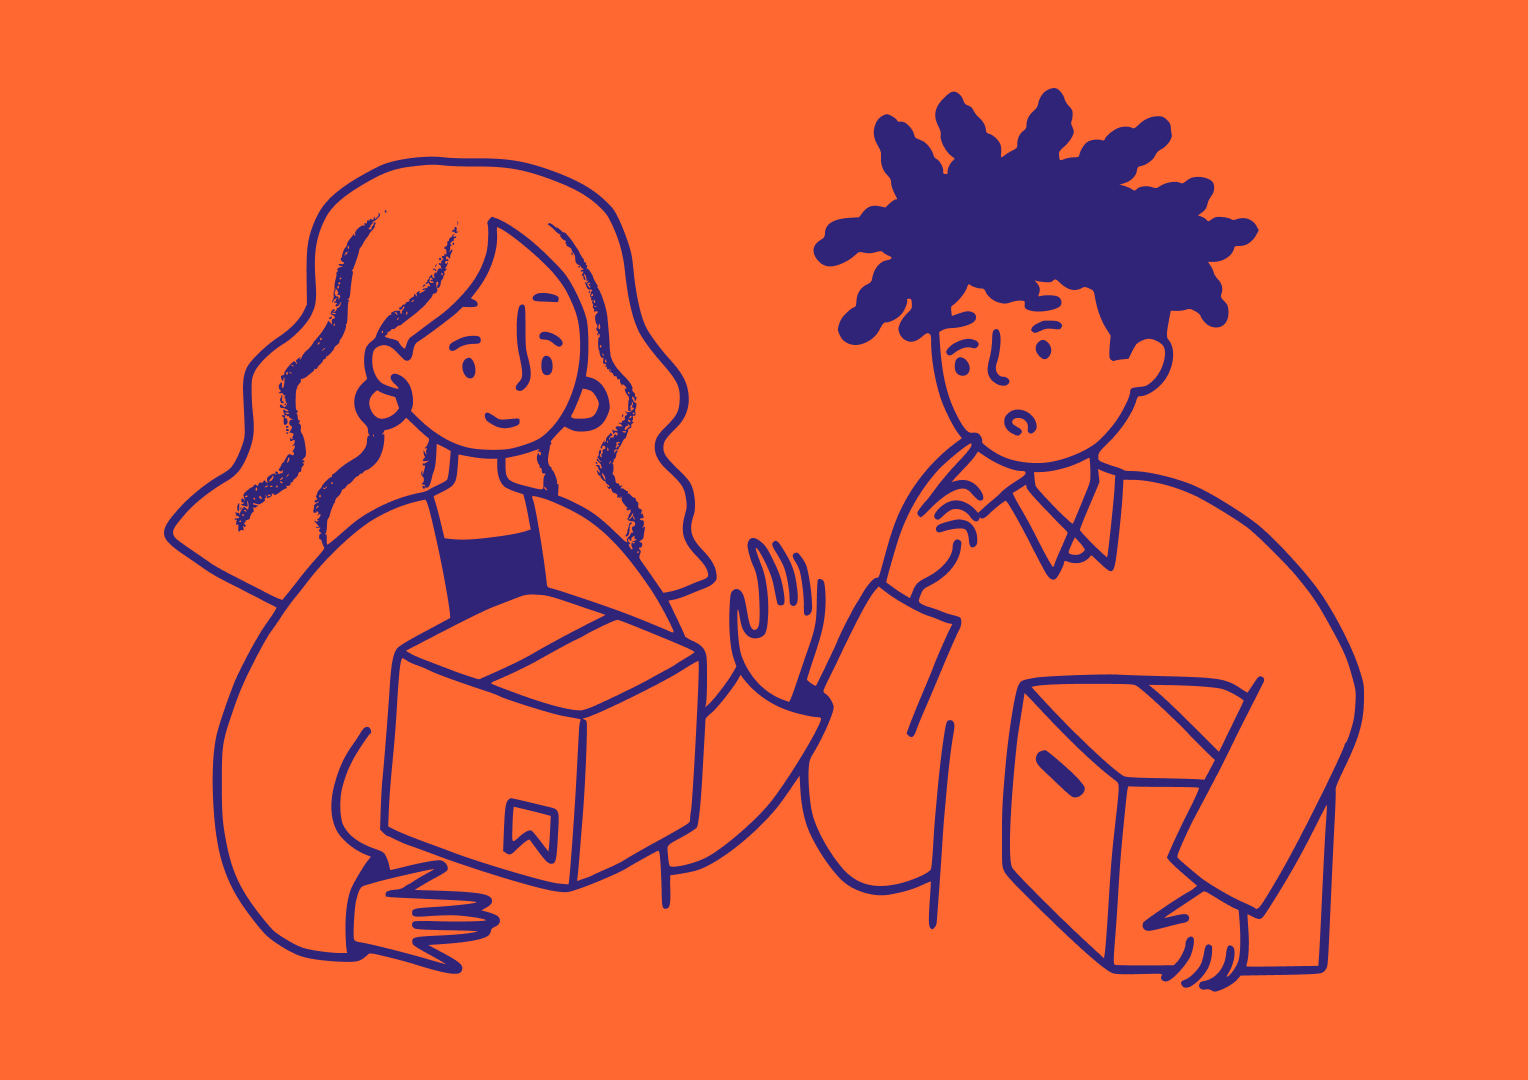 One long haired lady with is making a box float around her arms while a curly haired man is watching in awe while holding a box.